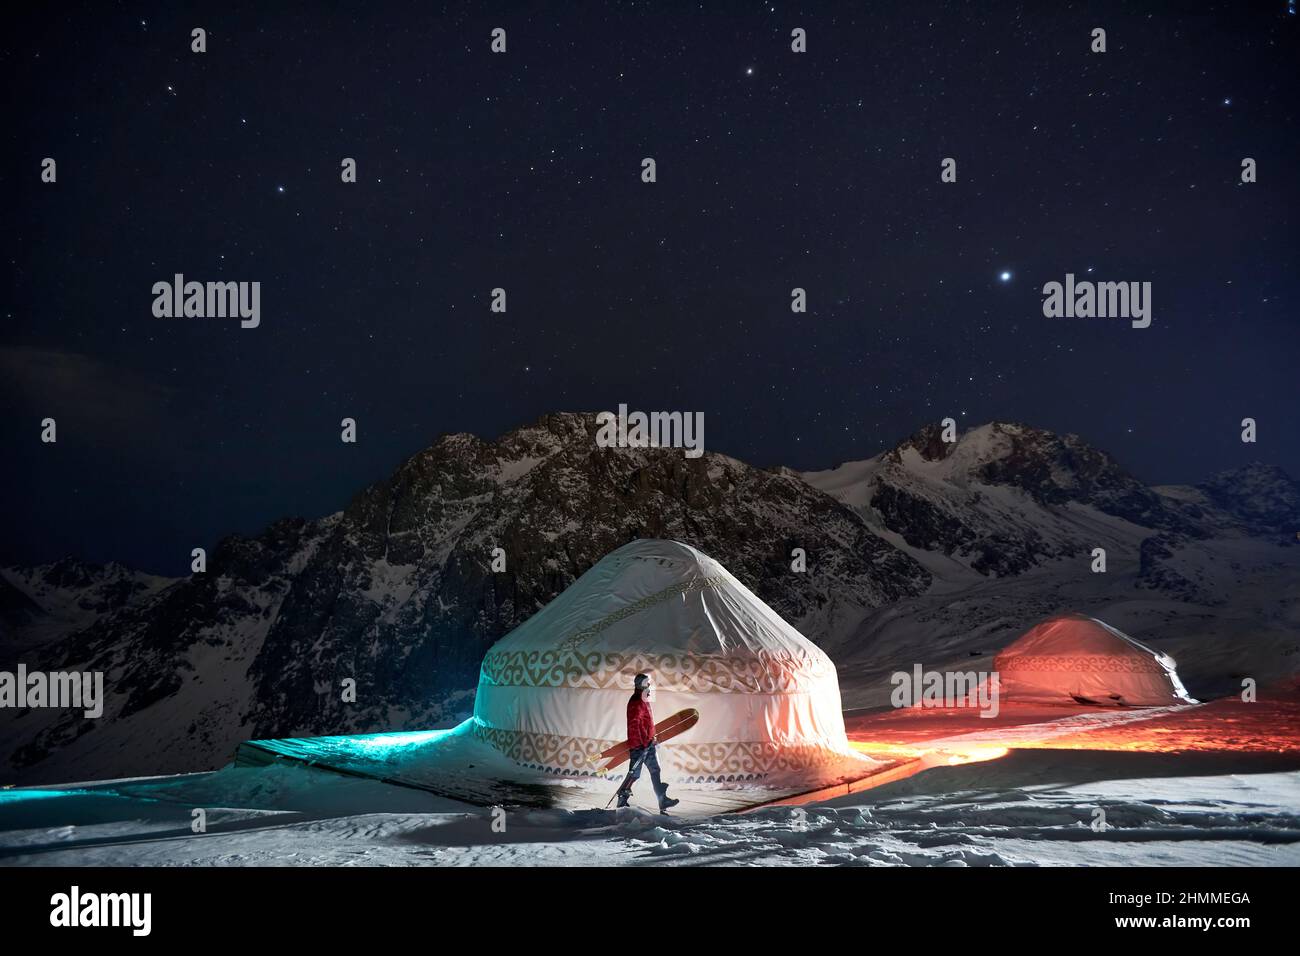 A man with a snowboard walking near a yurt at night in winter in the mountains Stock Photo